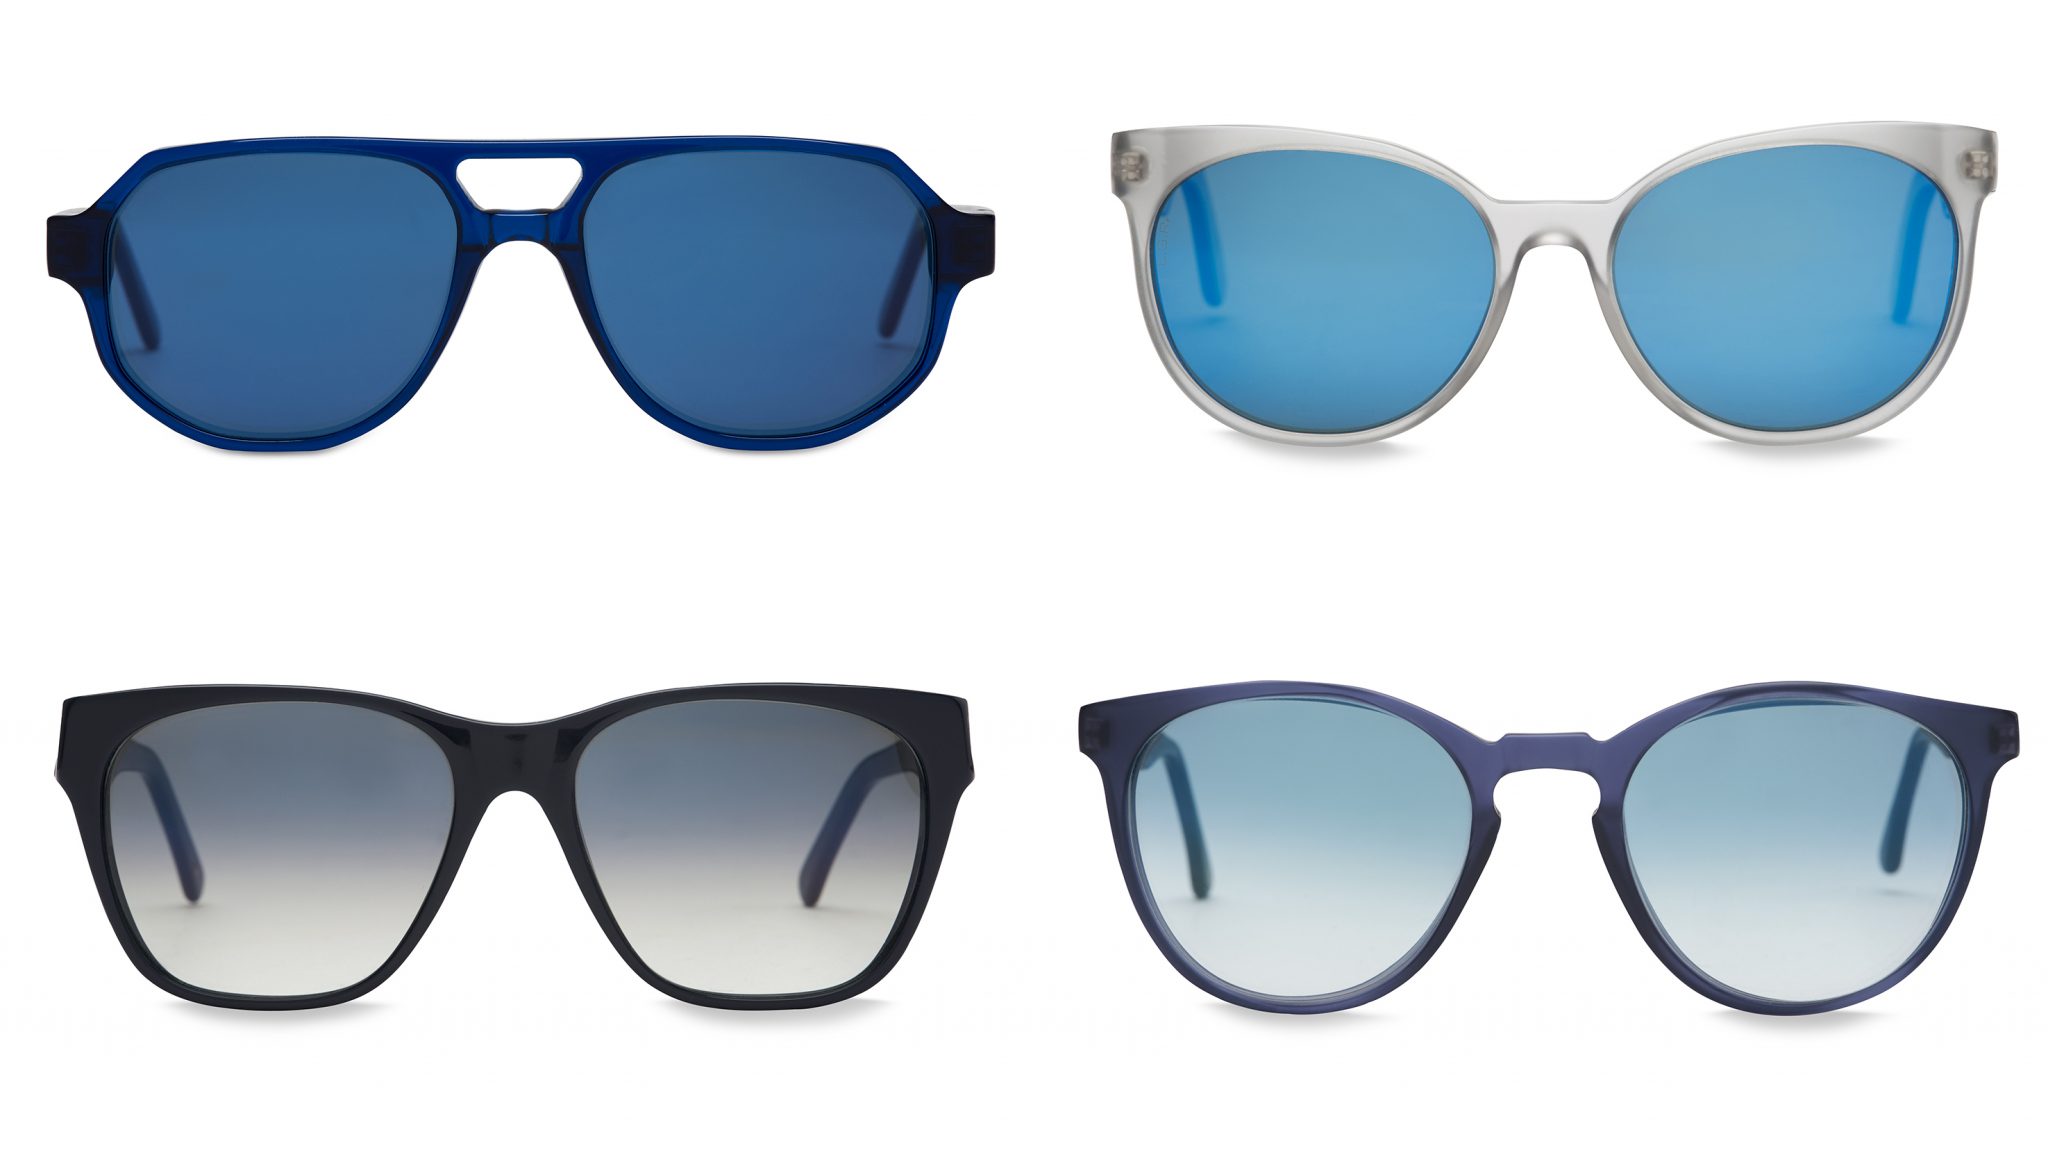 Frescobol Carioca and with L.G.R together to a Covetable Range of Sunglasses